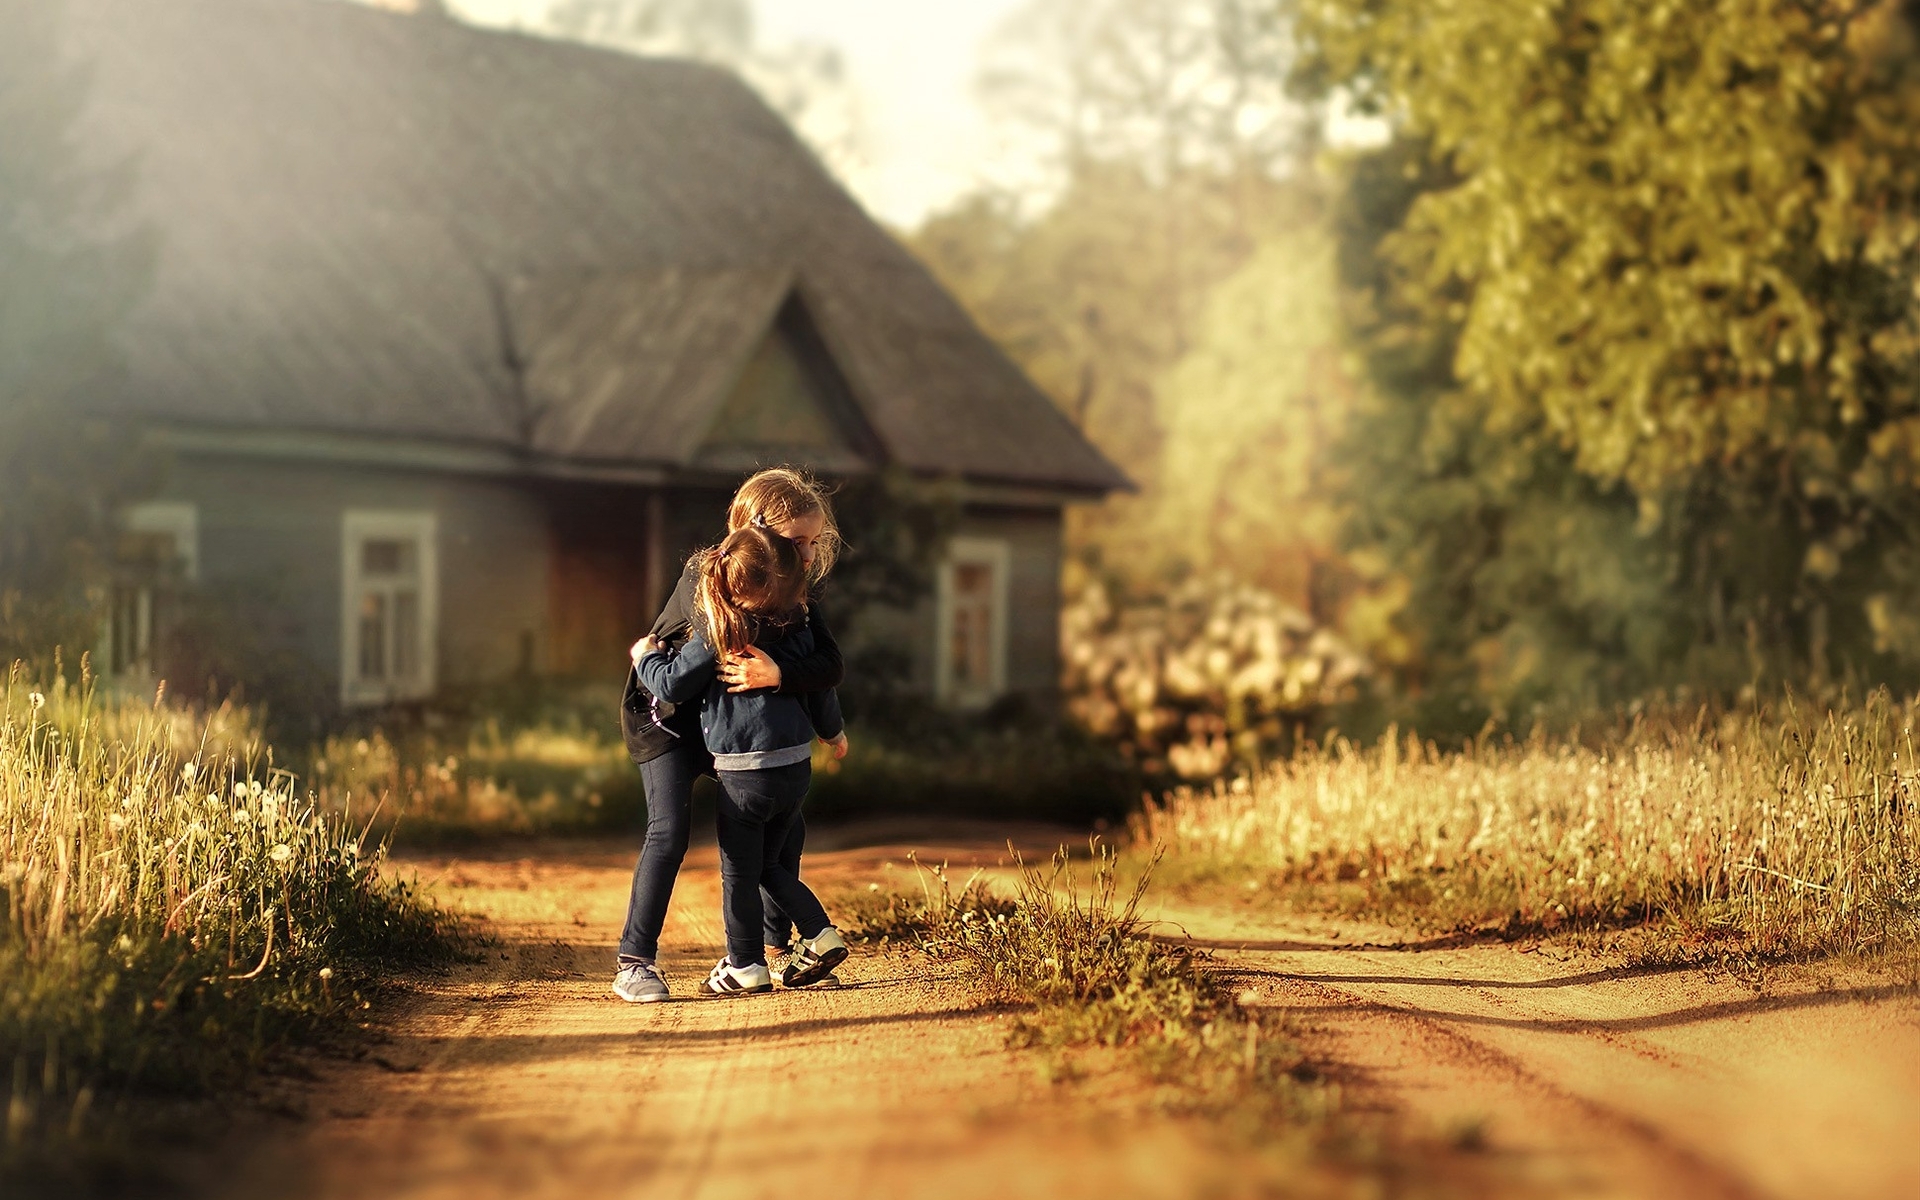 Image: Girls, embracing, sister, road, grass, house, sunny day, blur